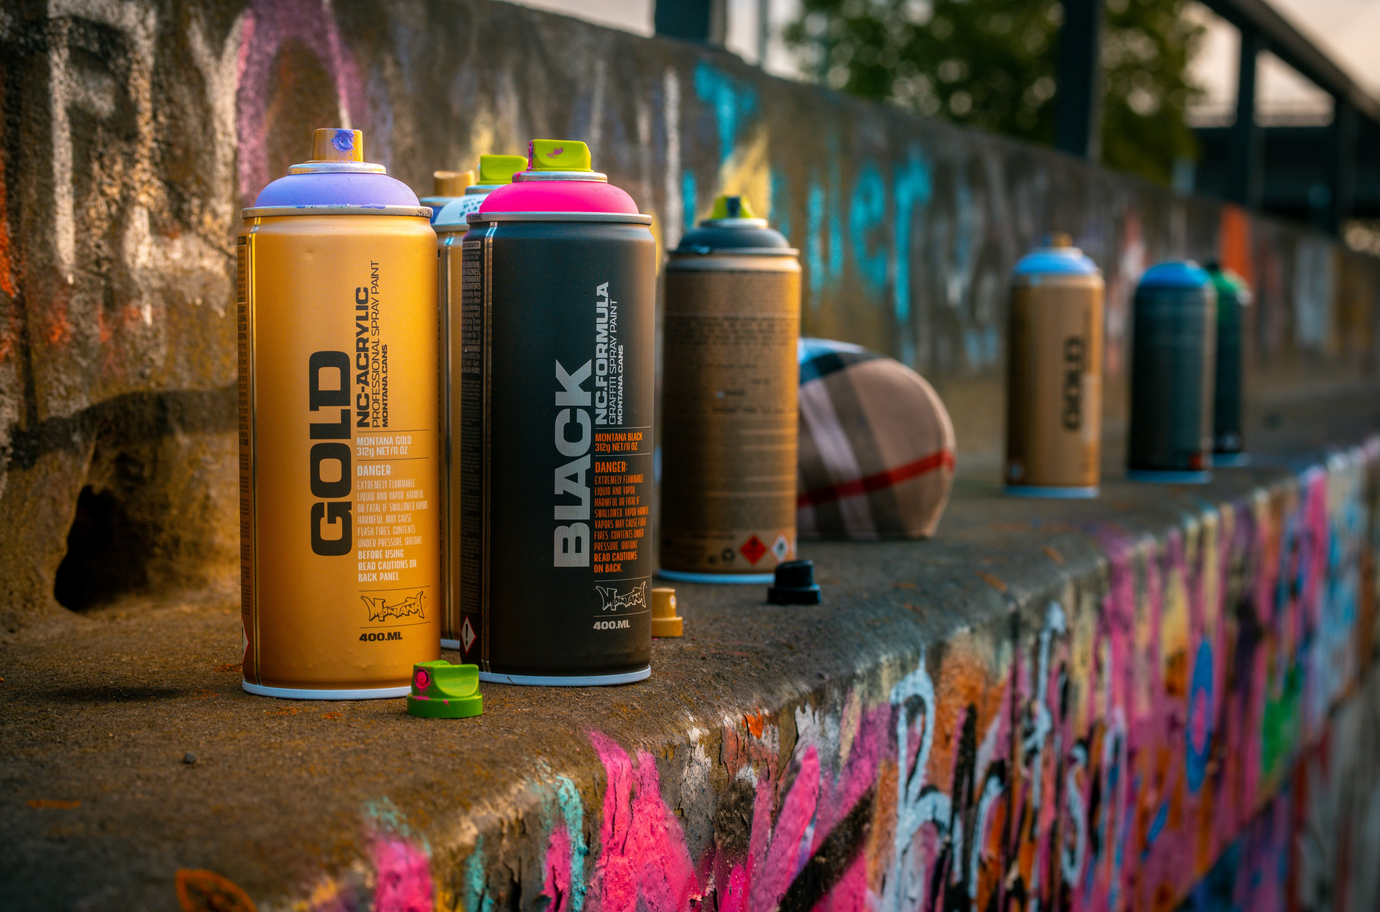 Spray paint cans displayed outdoors on a place covered by graffitis.